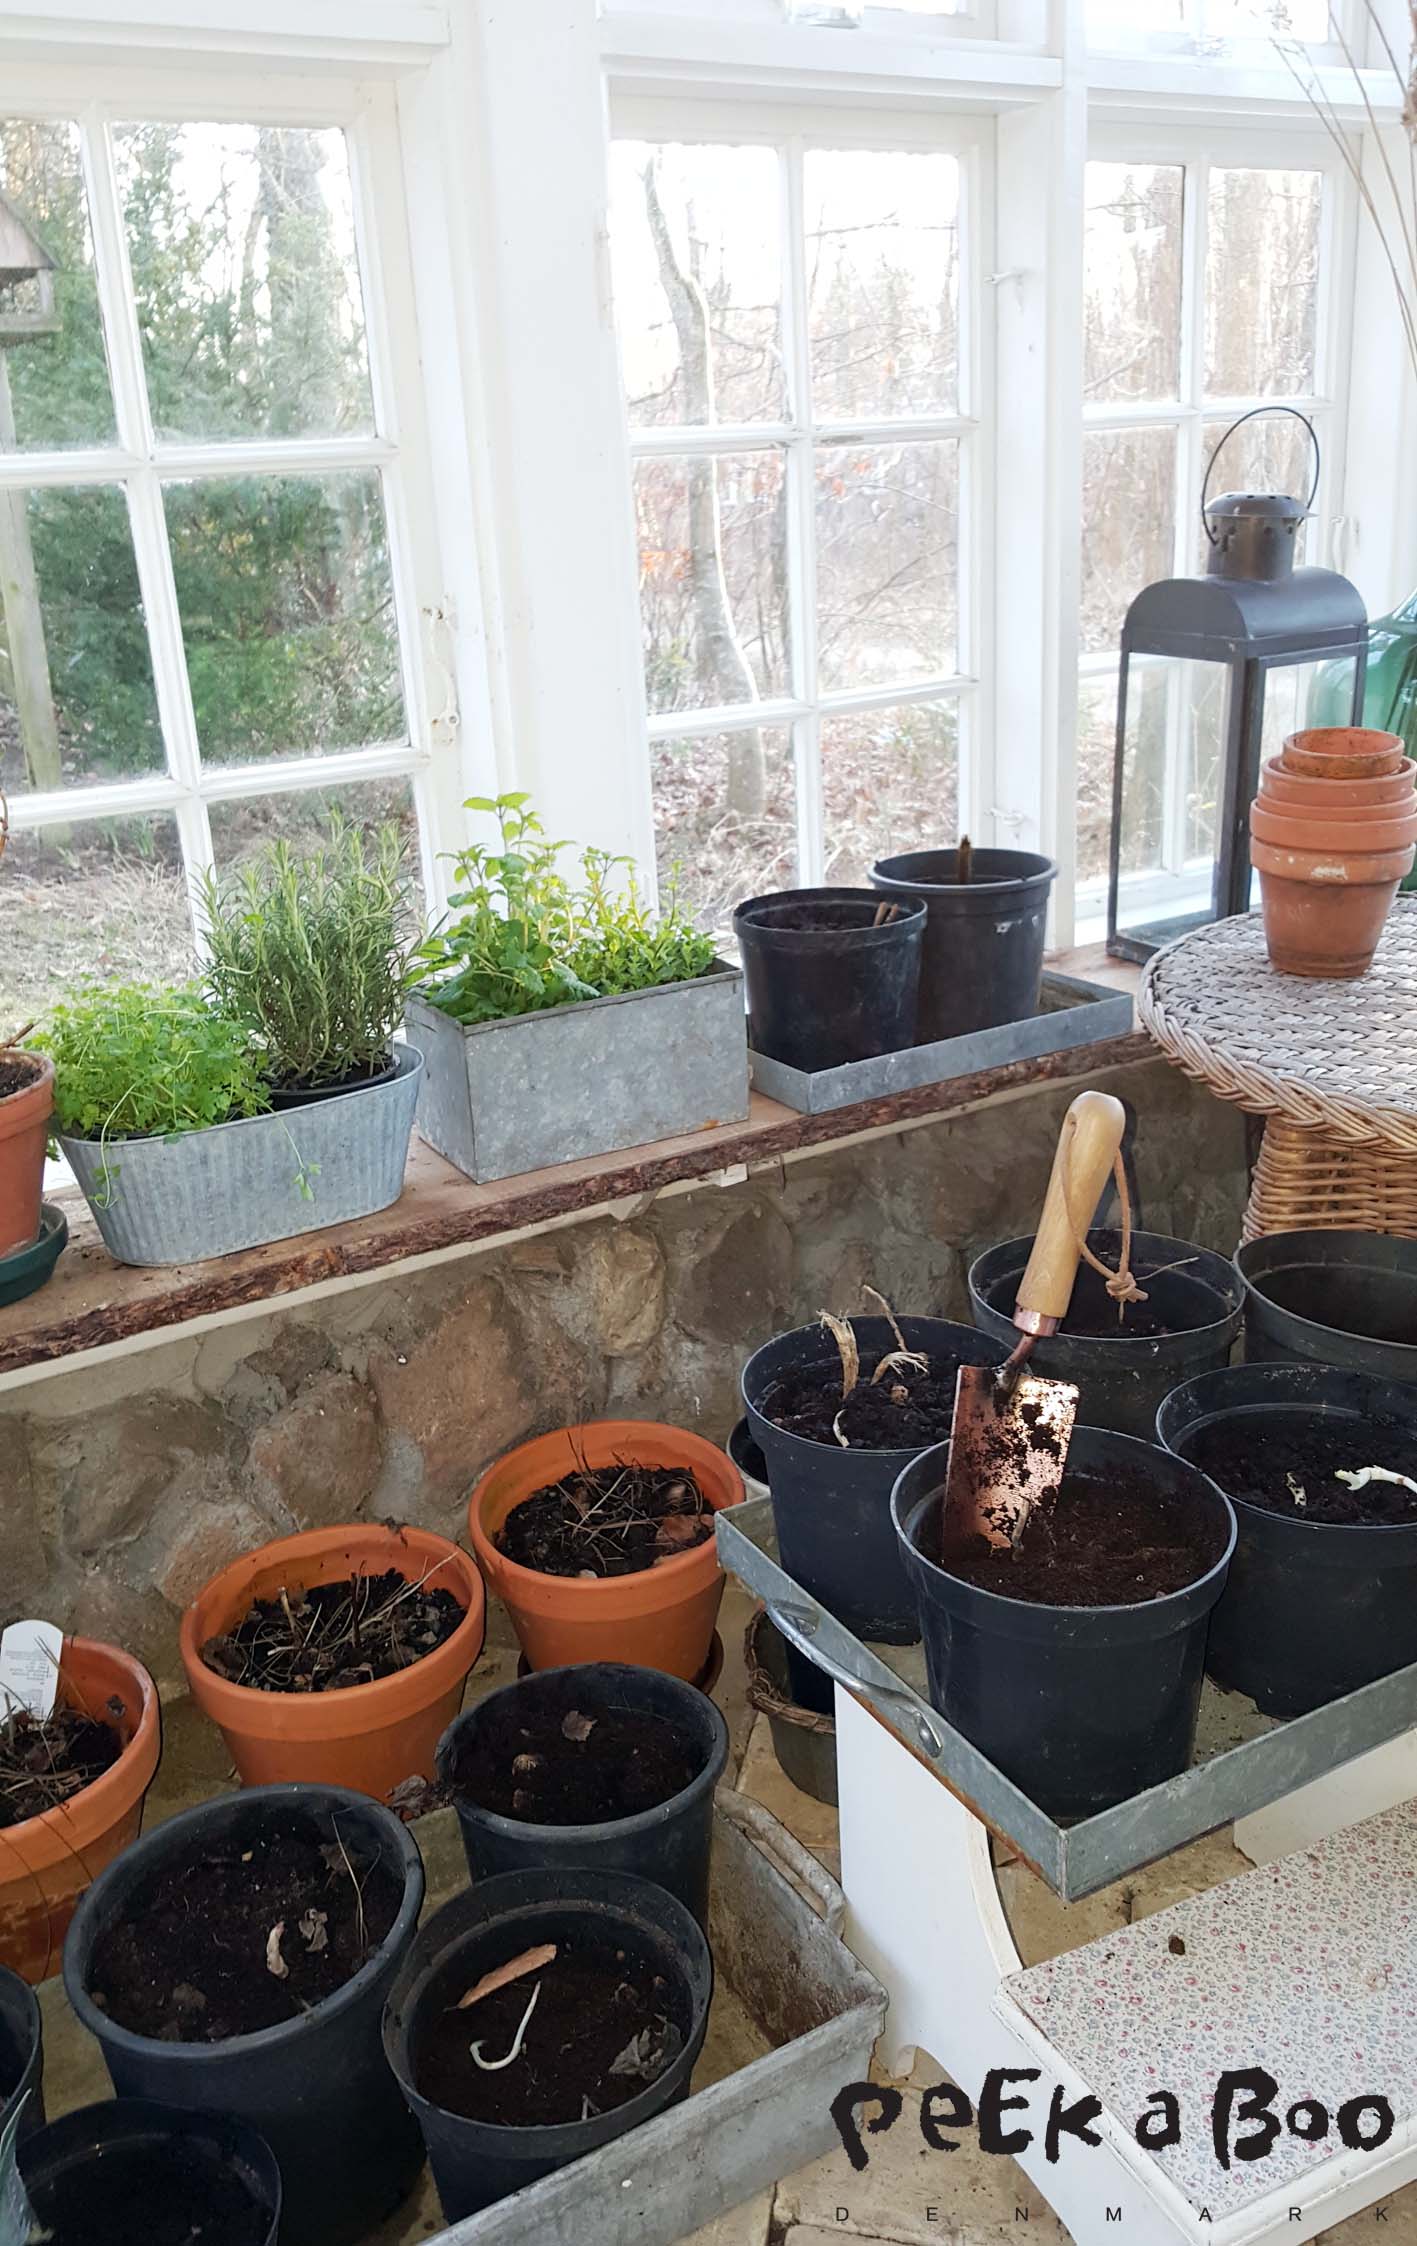 The greenhouse is now filled with pots. And my patience now has to come to a test...